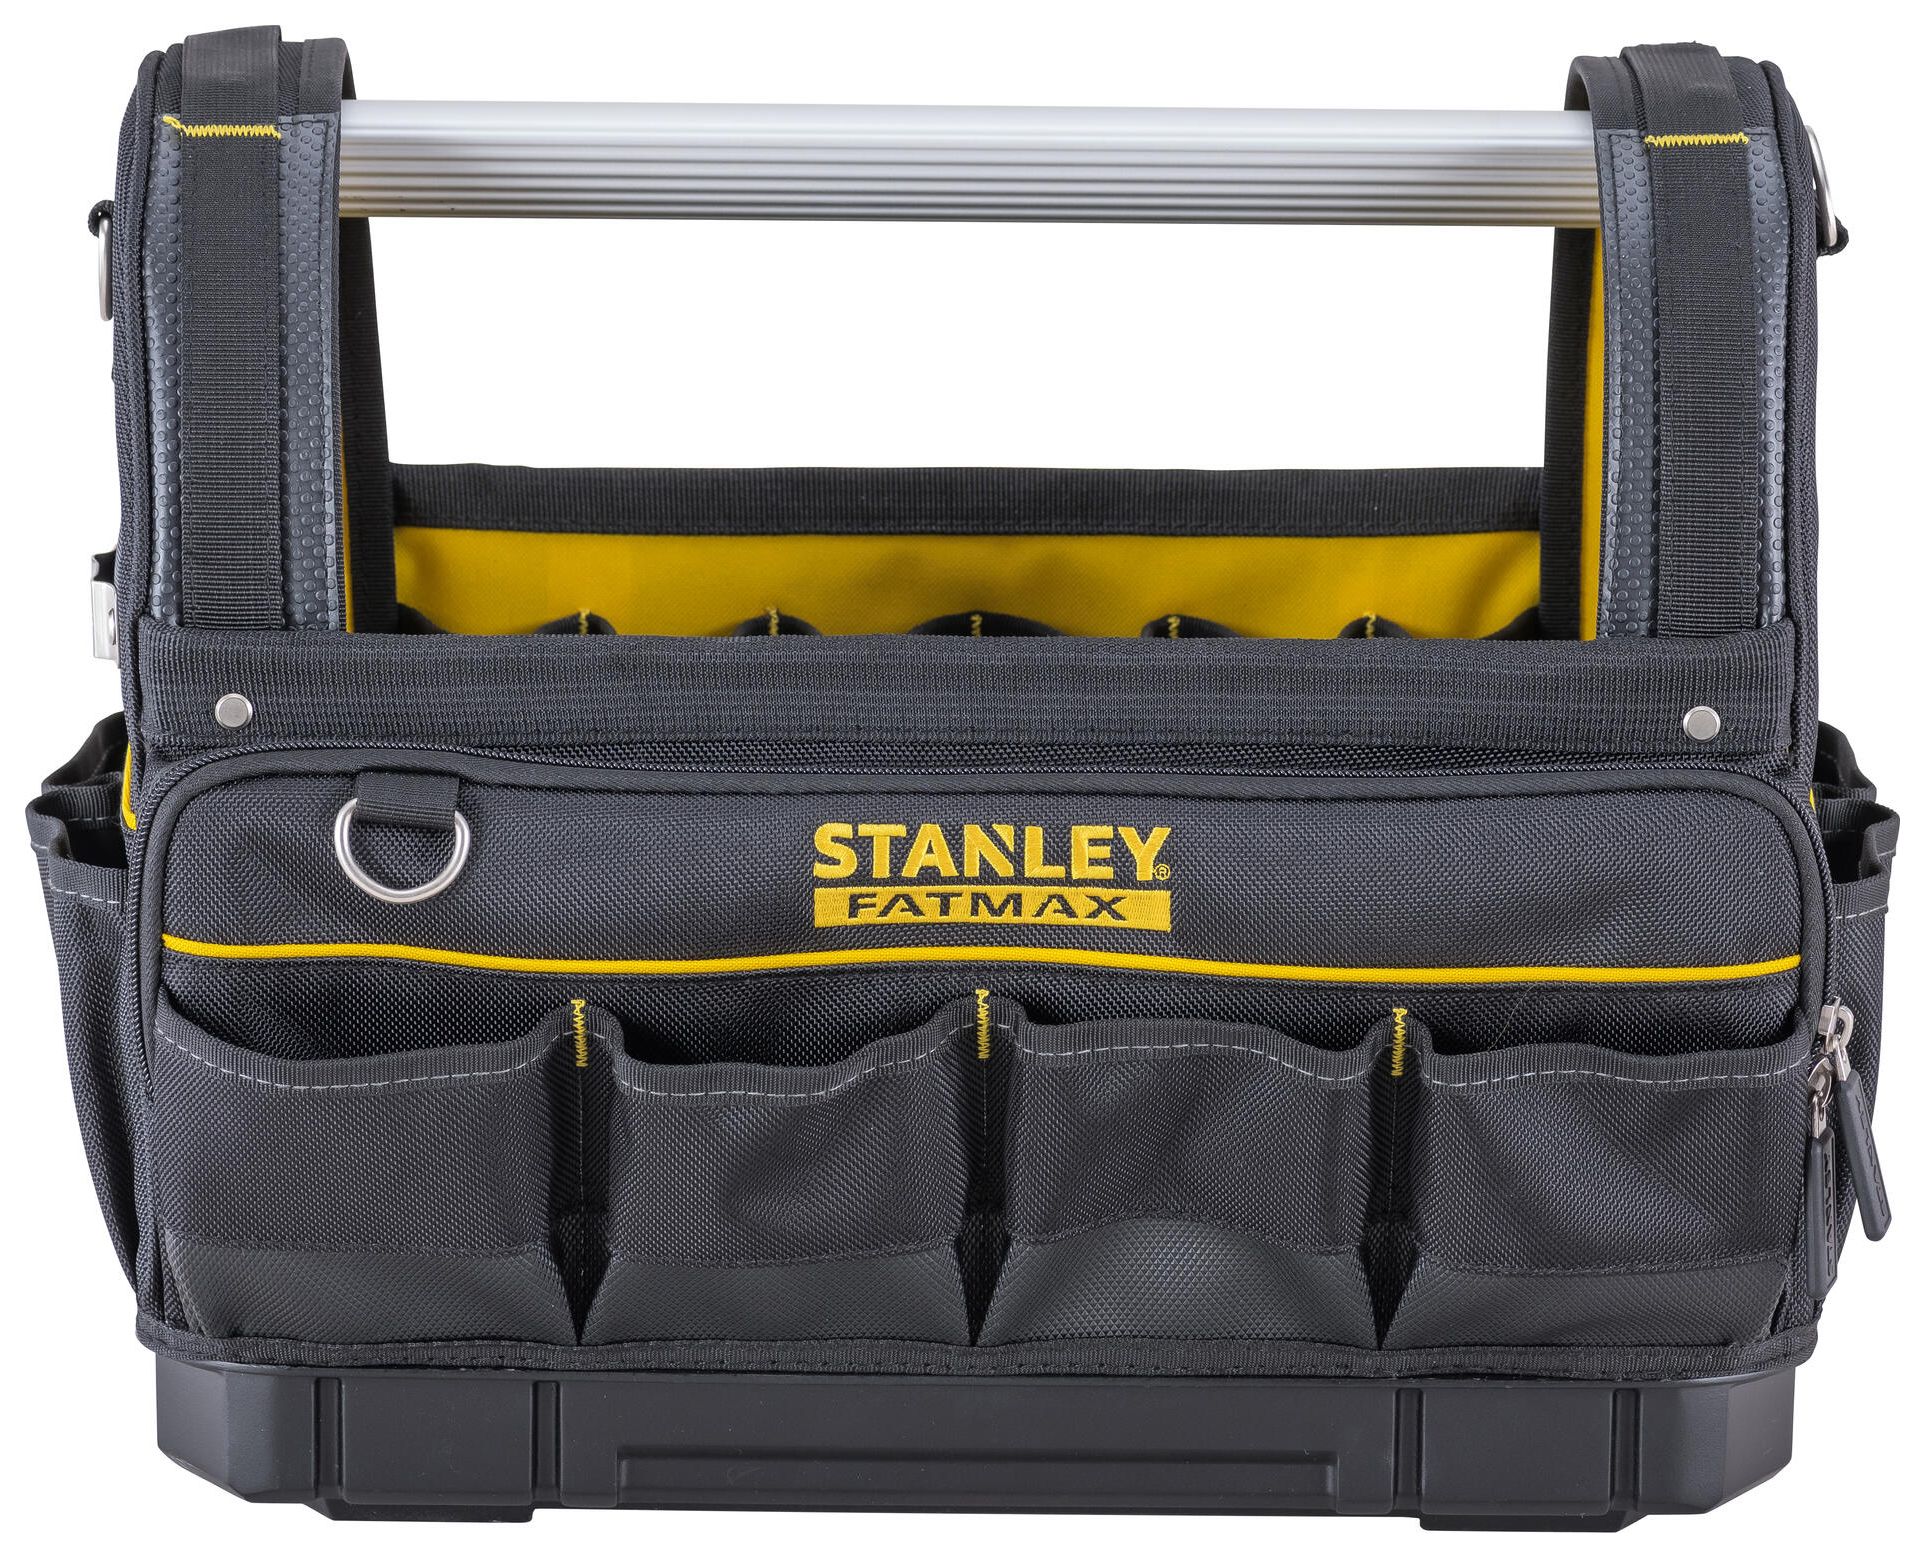 STANLEY FATMAX PROSTACK Tool Storage Soft Tote